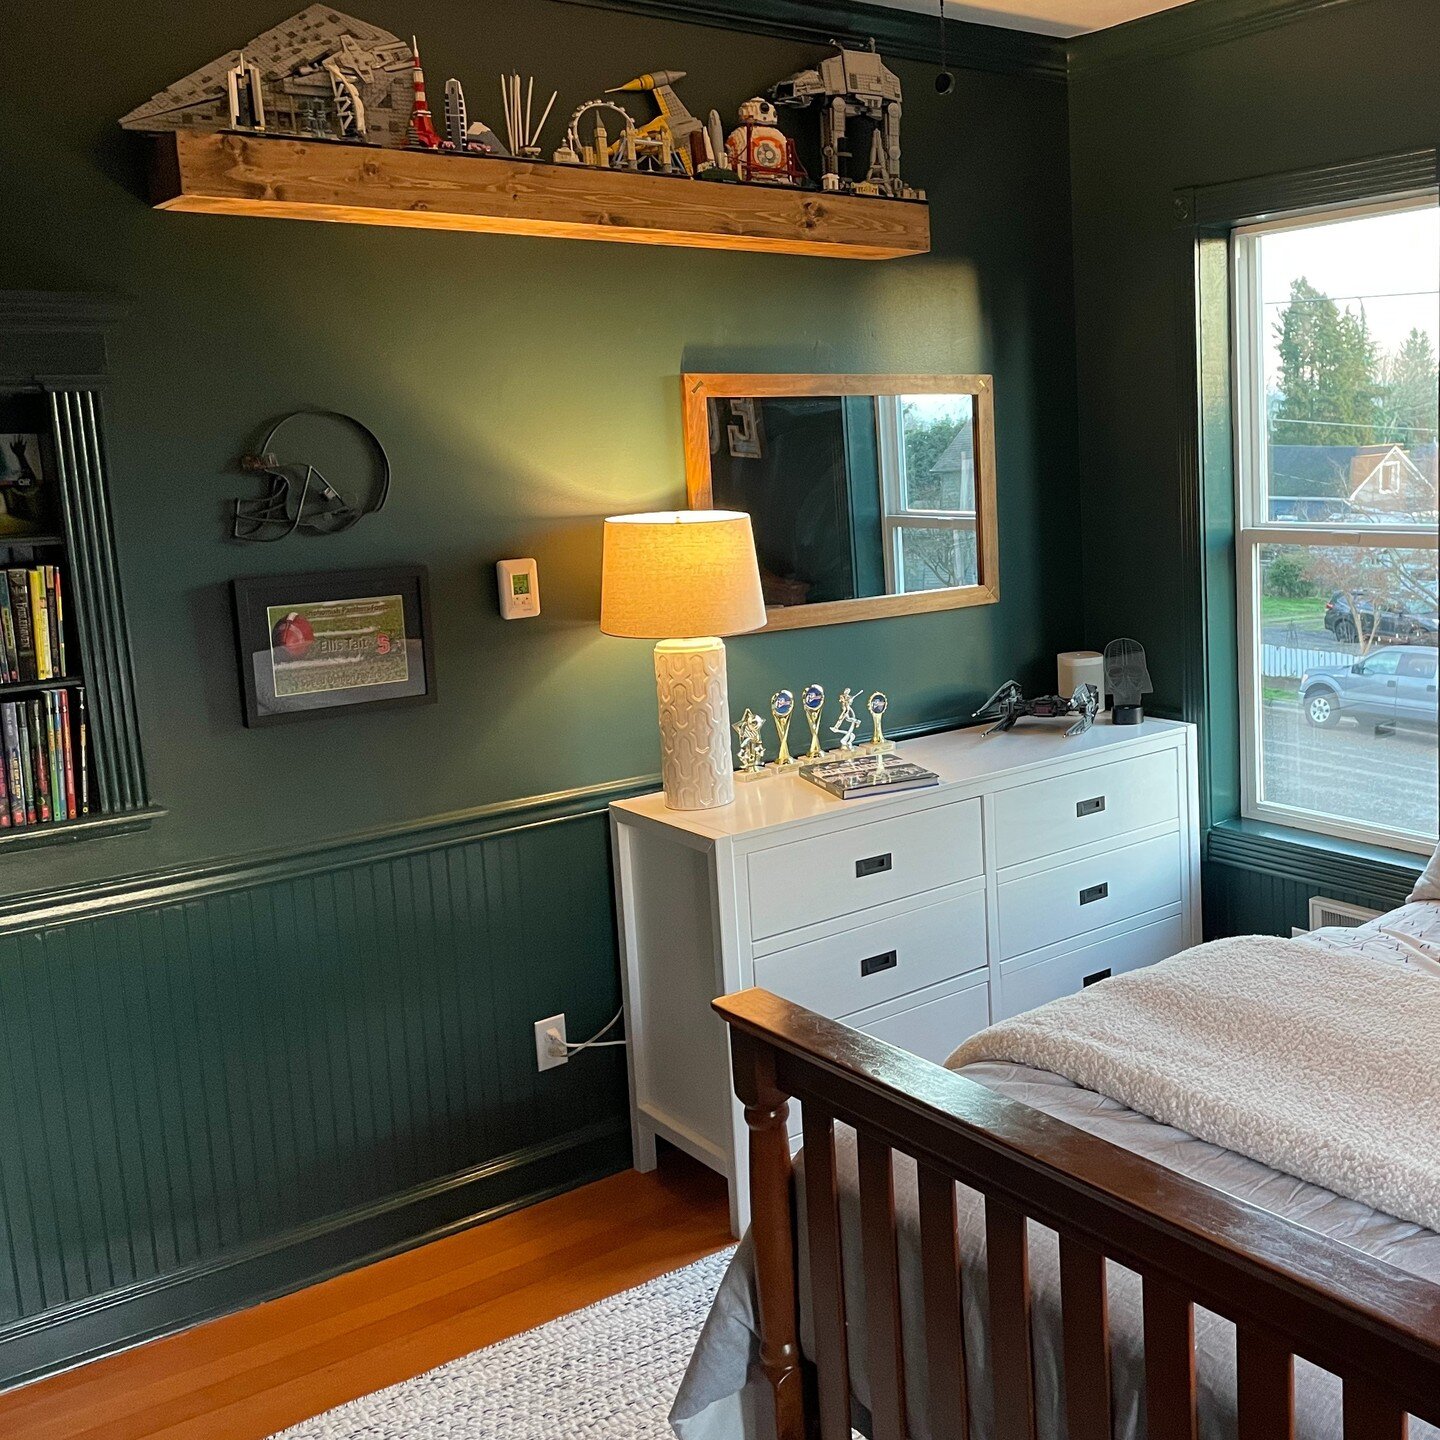 This 13 year old boys bedroom grew up with a quick refresh! We opted to paint all the millwork the same color as the walls. Behr Black Evergreen gives this room warmth and coziness with the neutral bedding/rug and natural wood elements mixed in. ⁣
.⁣